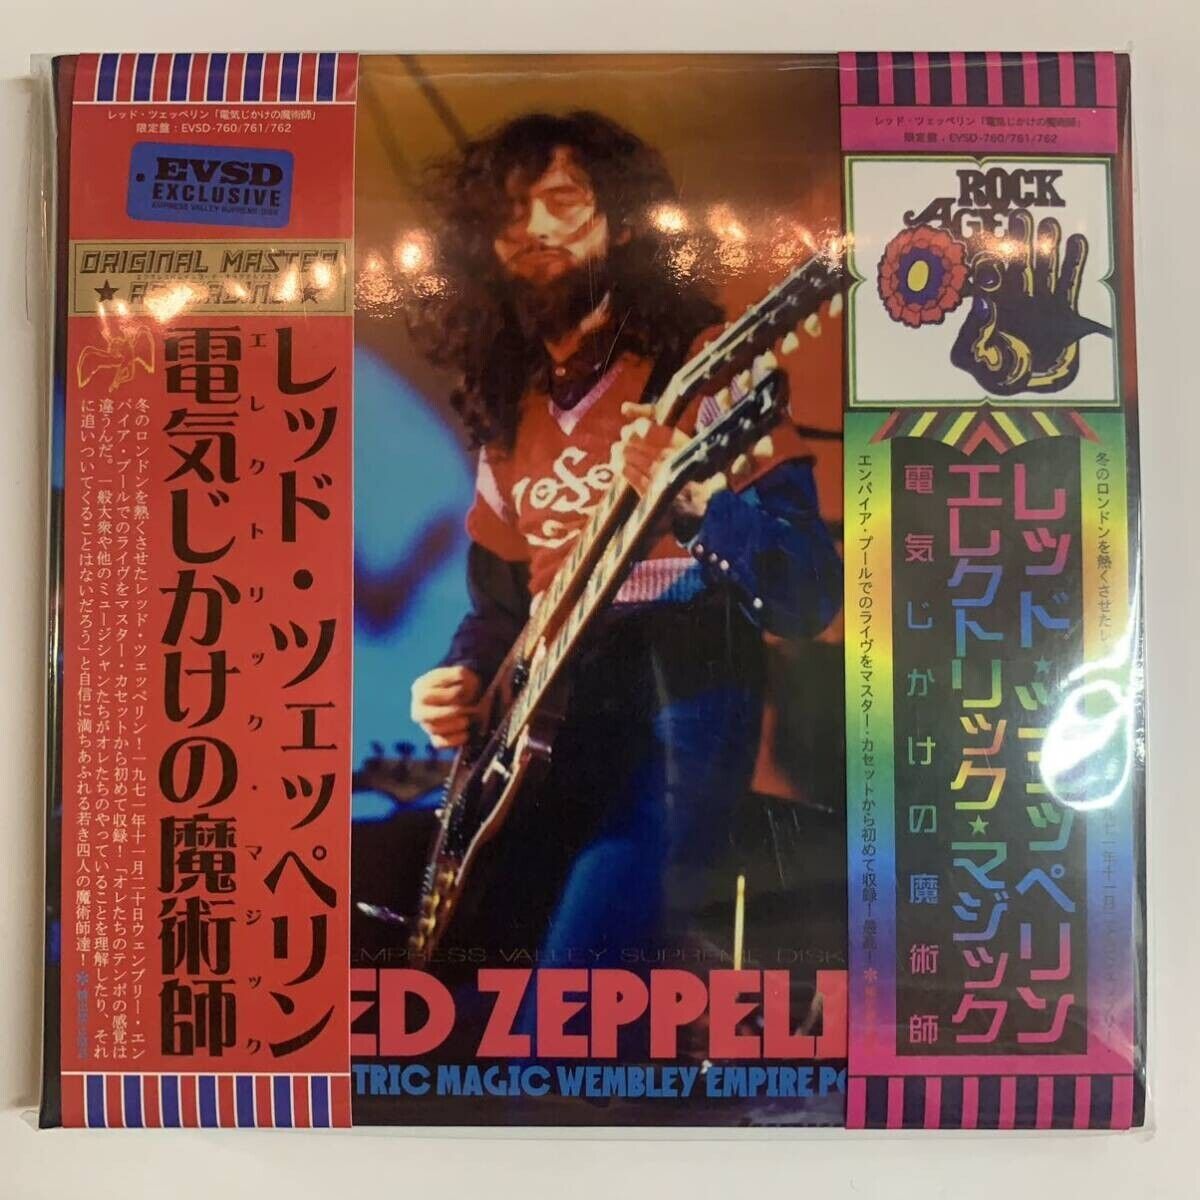 LED ZEPPELIN / ELECTRIC MAGIC「電気仕掛けの魔術師」Empress Valley Supreme Disk (3CD)